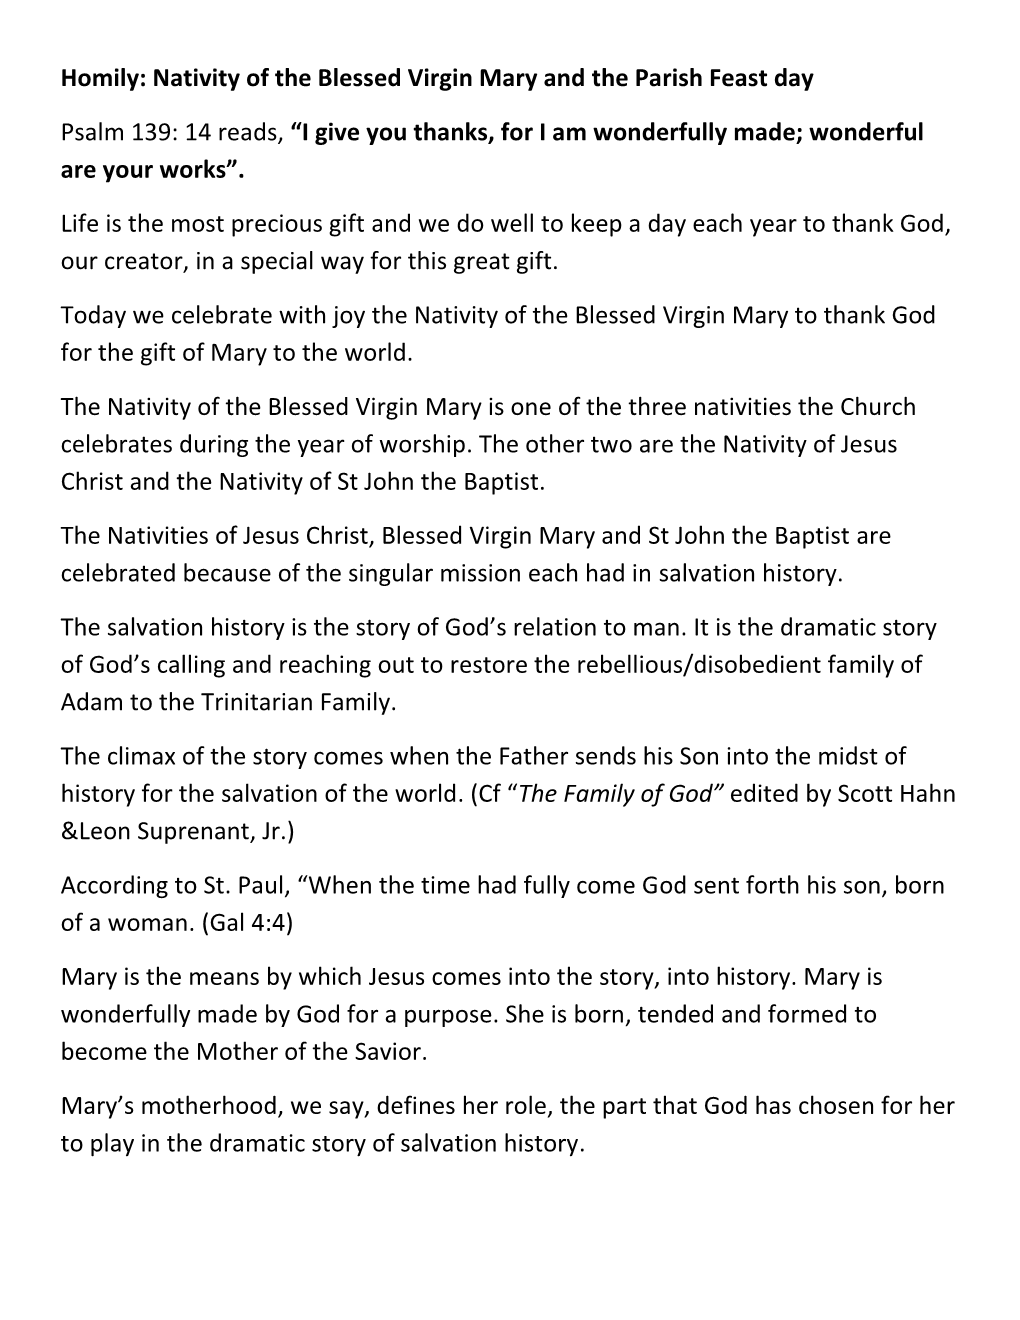 Nativity of the Blessed Virgin Mary and the Parish Feast Day Psalm